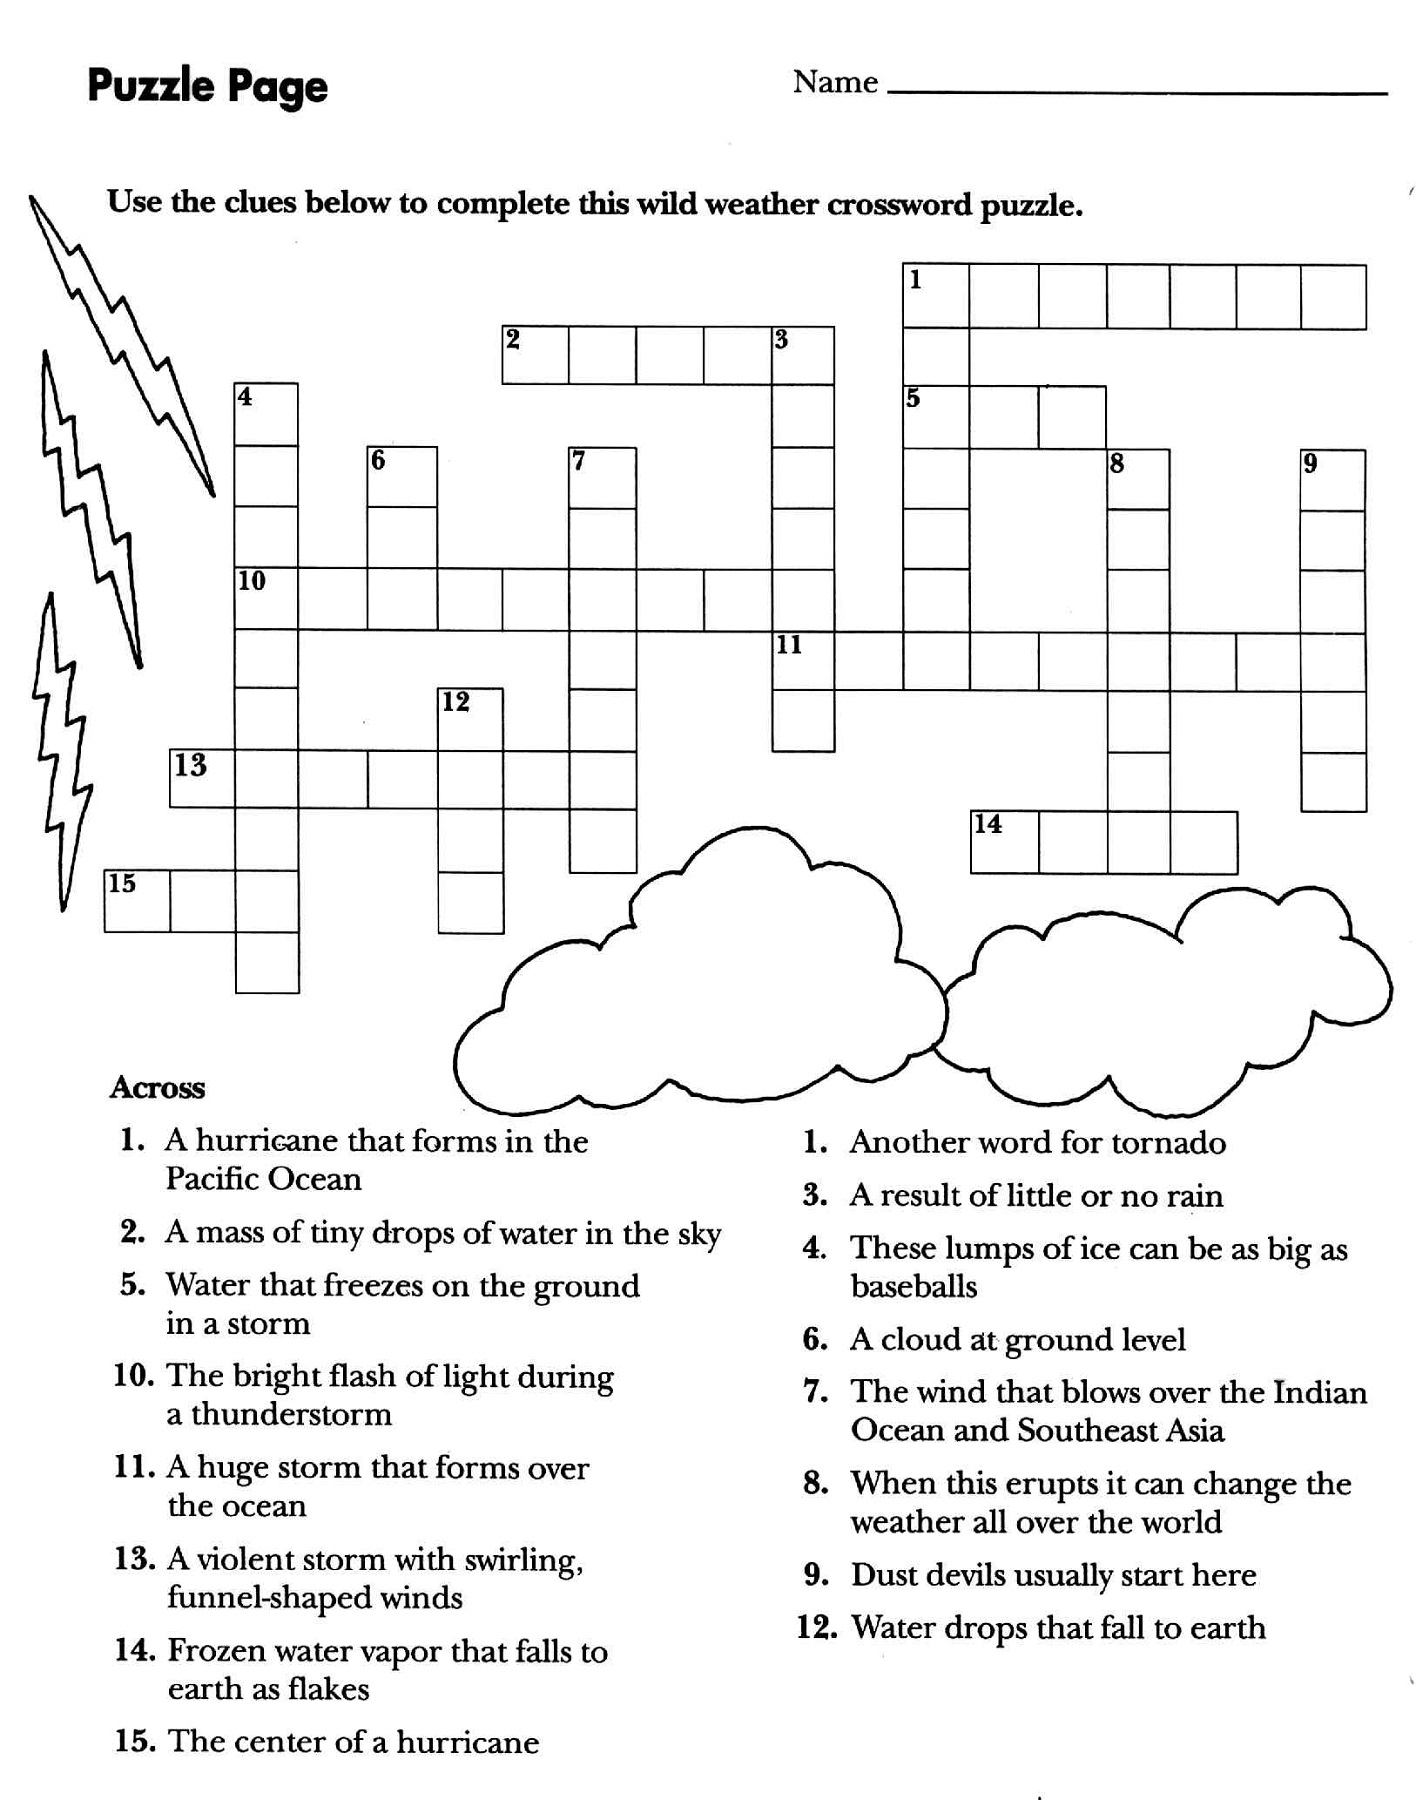 crossword-puzzles-for-5th-graders-activity-shelter-crossword-puzzles